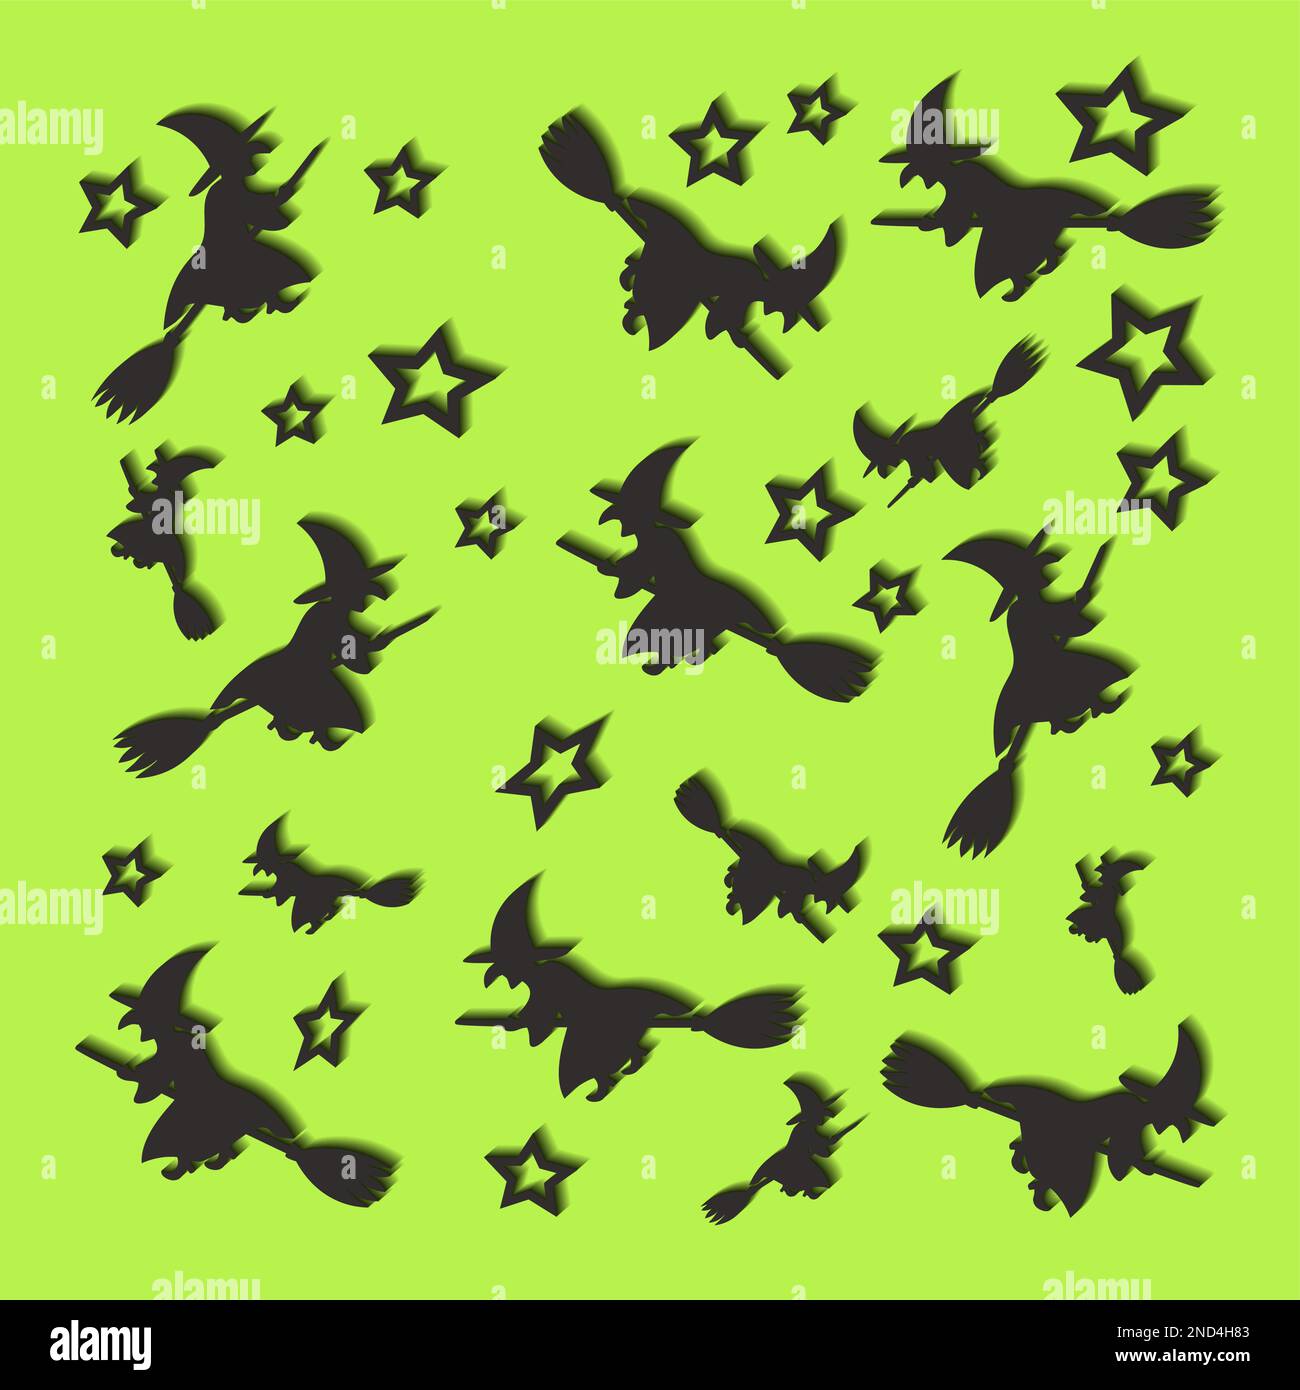 Halloween pattern with stars and flying witches on a green background Stock Vector